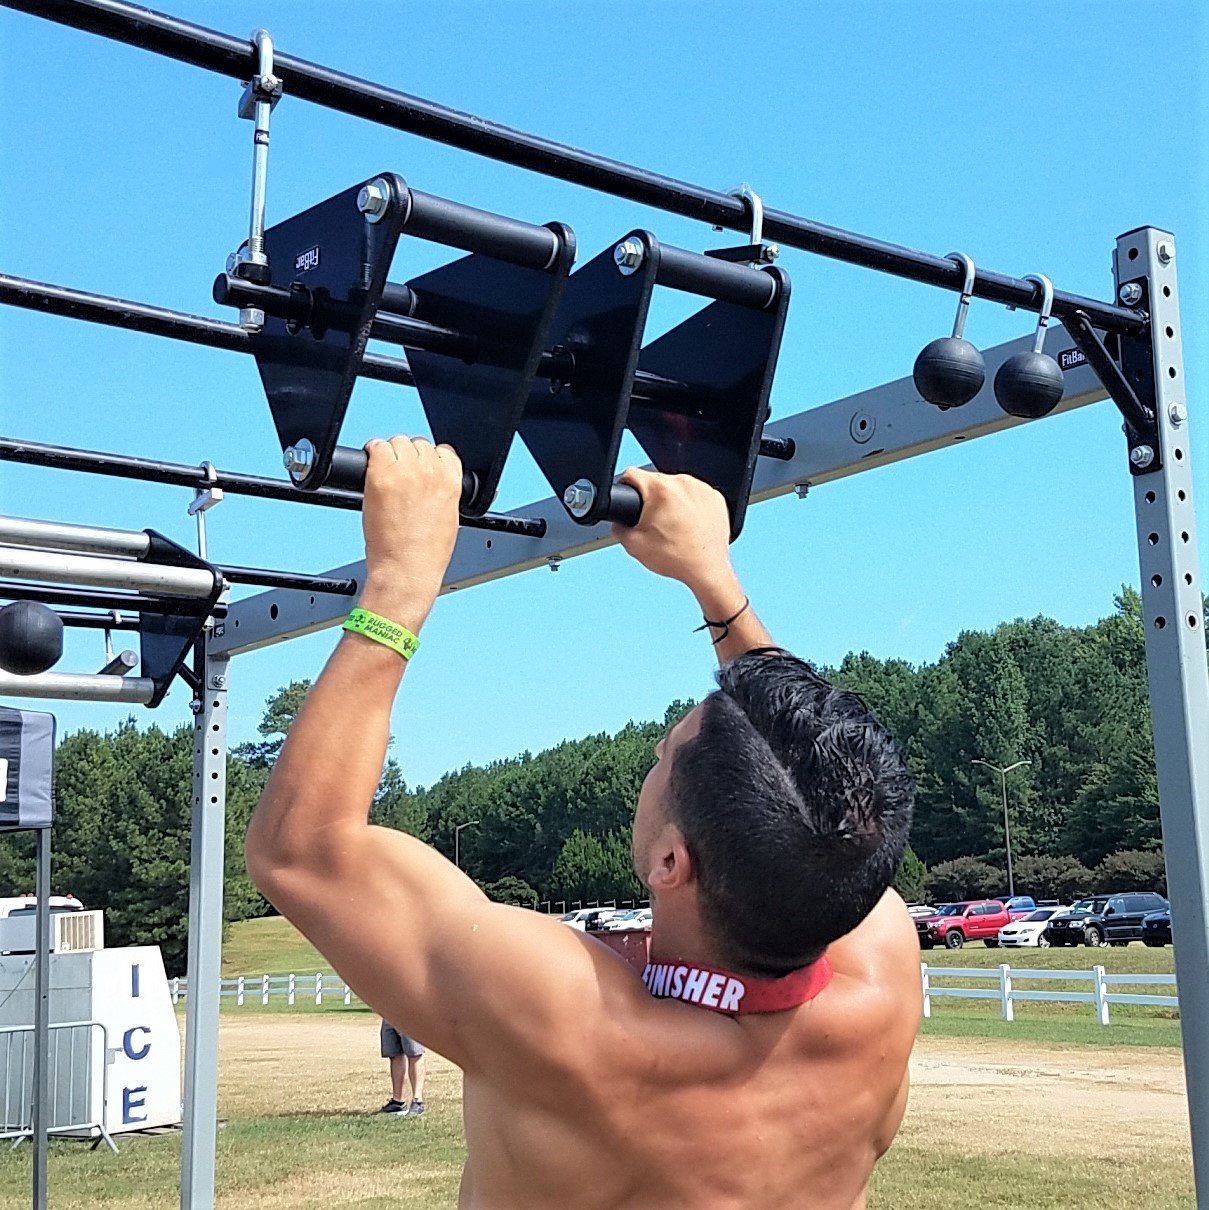 Top 3 Pull Up Variations - FitBar Grip, Obstacle, Strength Equipment